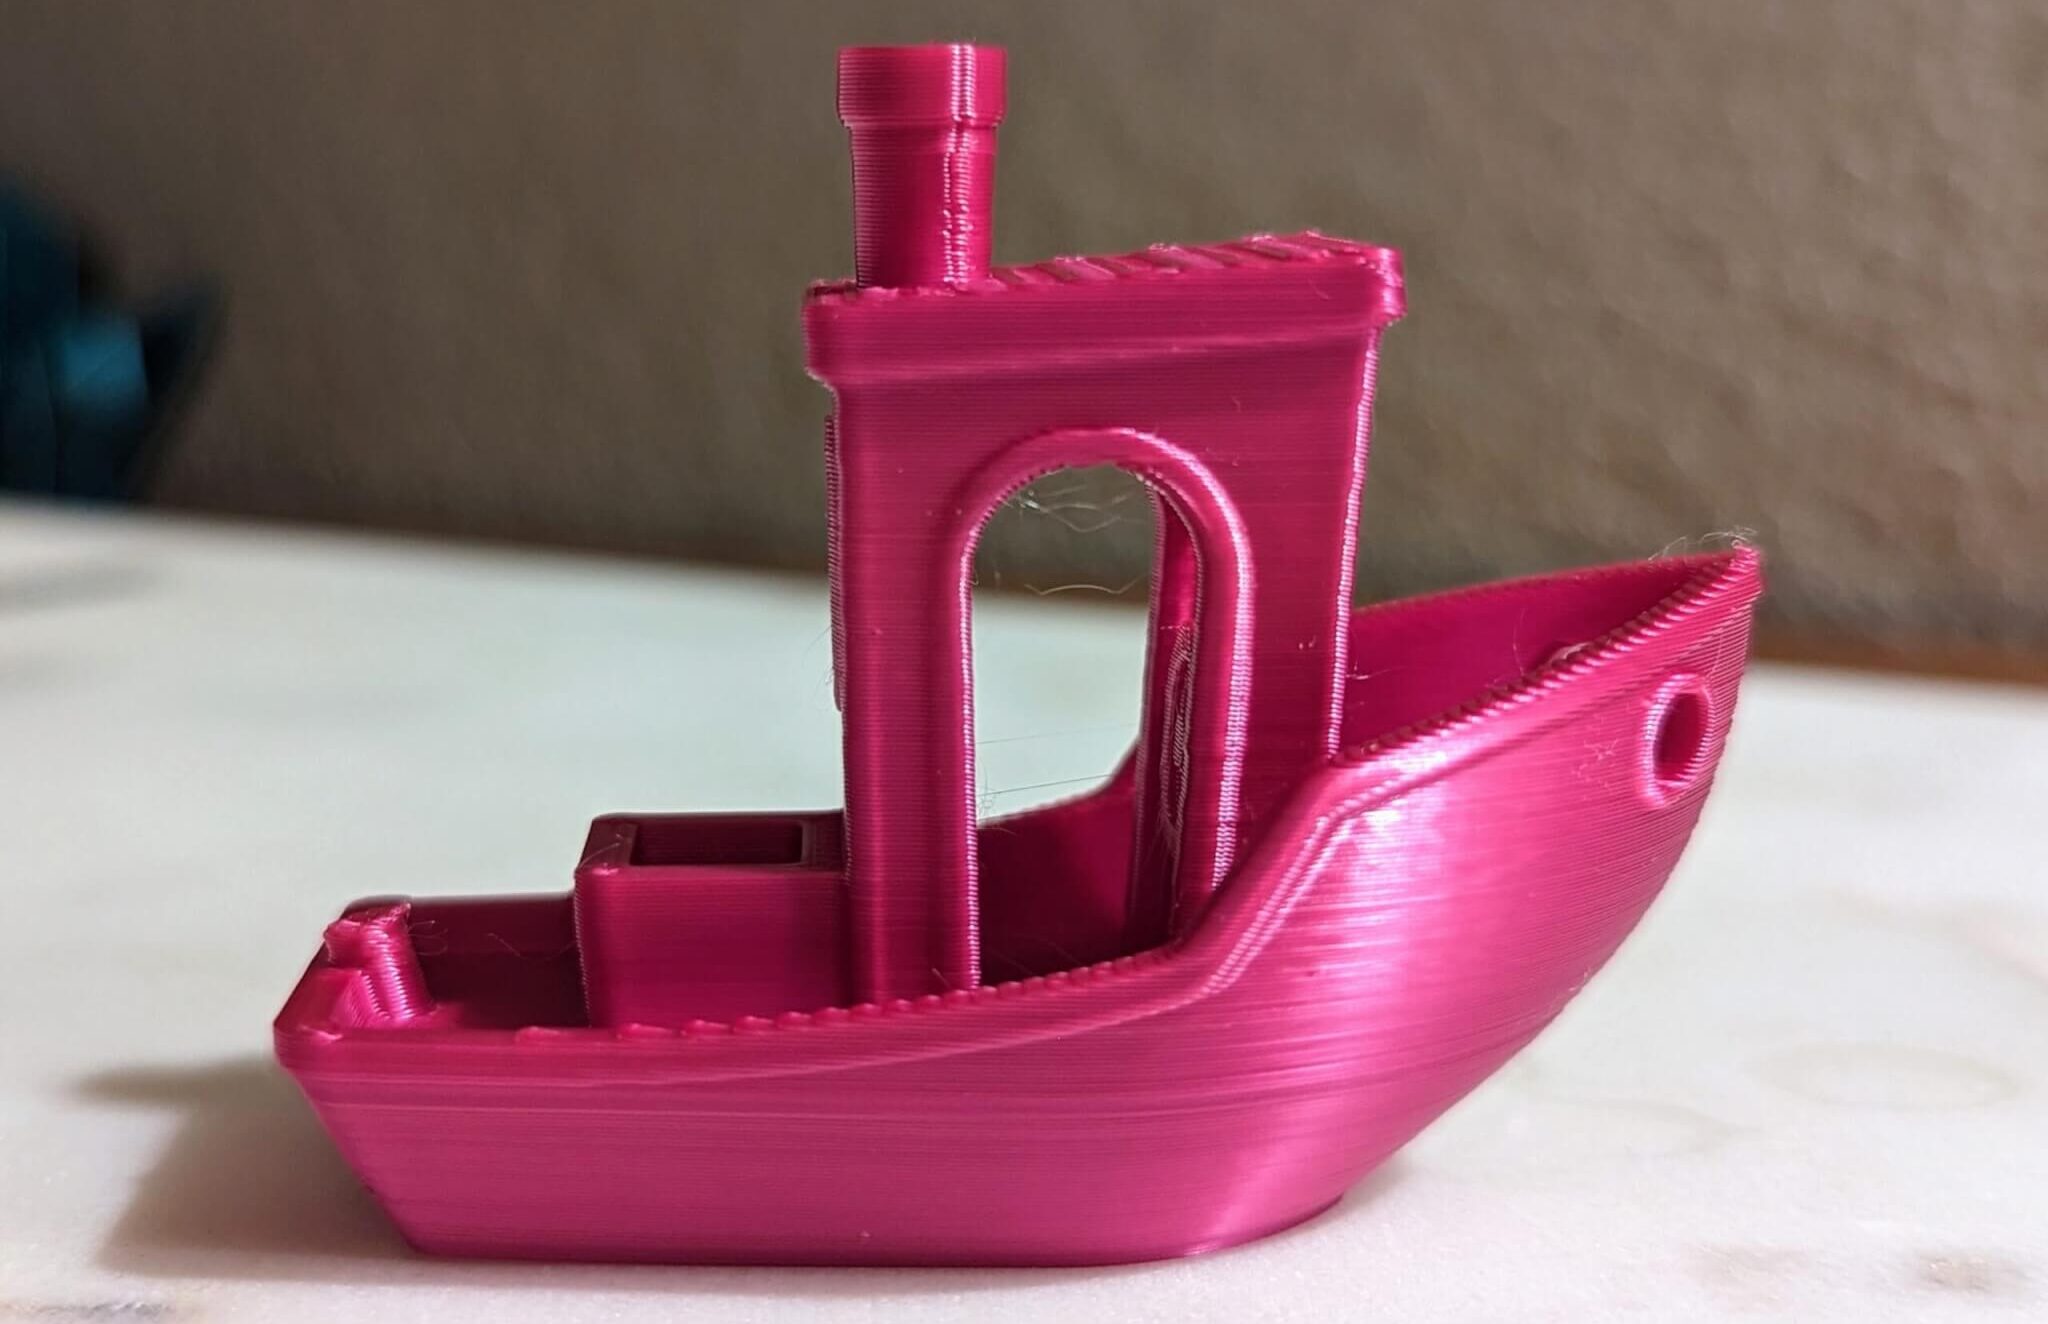 1 hour benchy on Ender 3 S1 using the MK4 profile